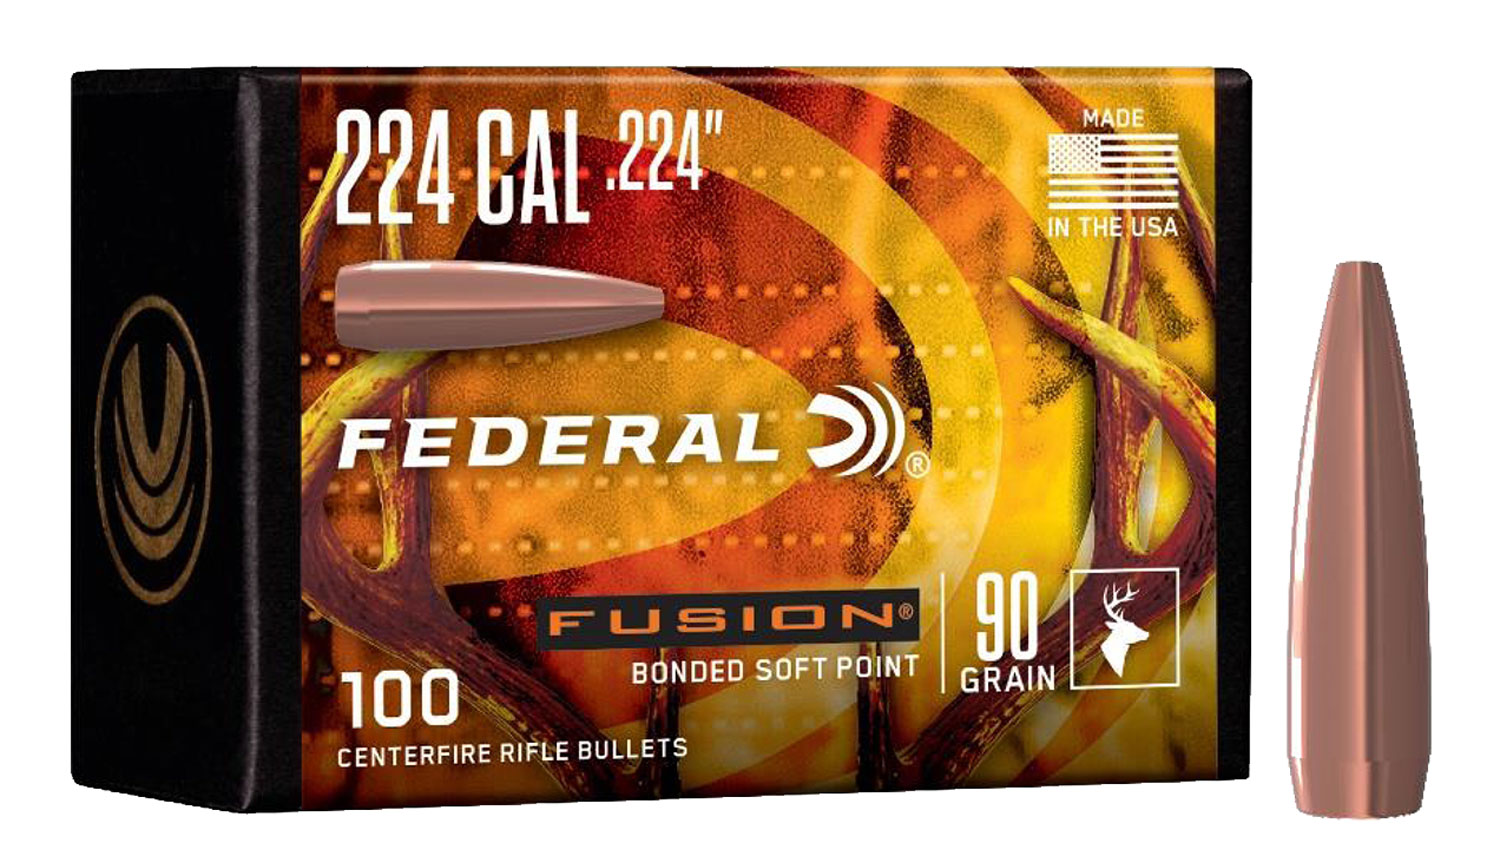 Federal FB224F1 Fusion Component  224 Cal .224 90 gr Bonded Soft Point